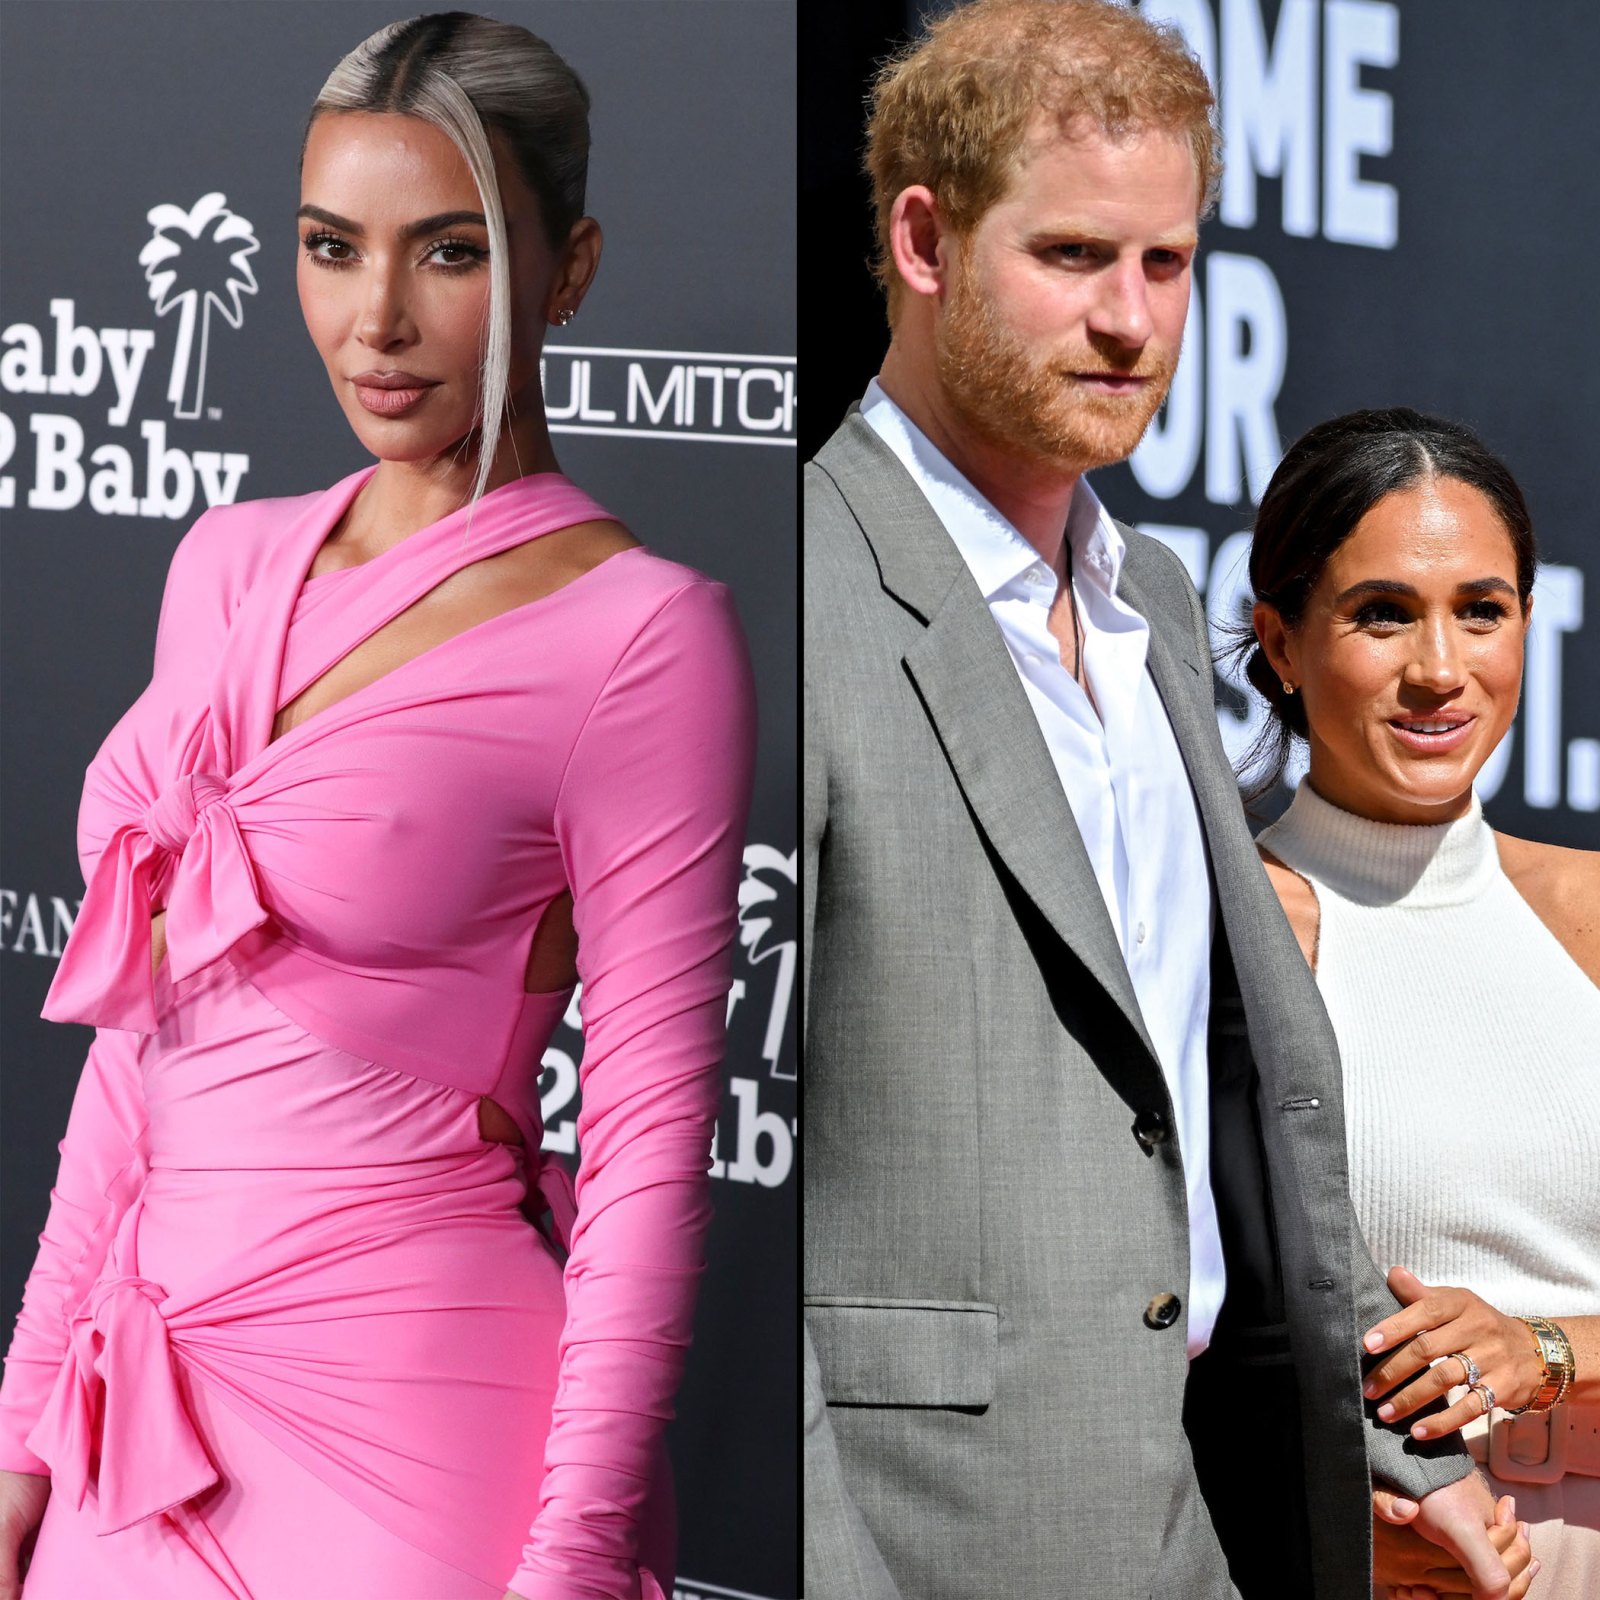 Most Memorable Photos of 2022: From Kardashian Weddings to Royal Reunions